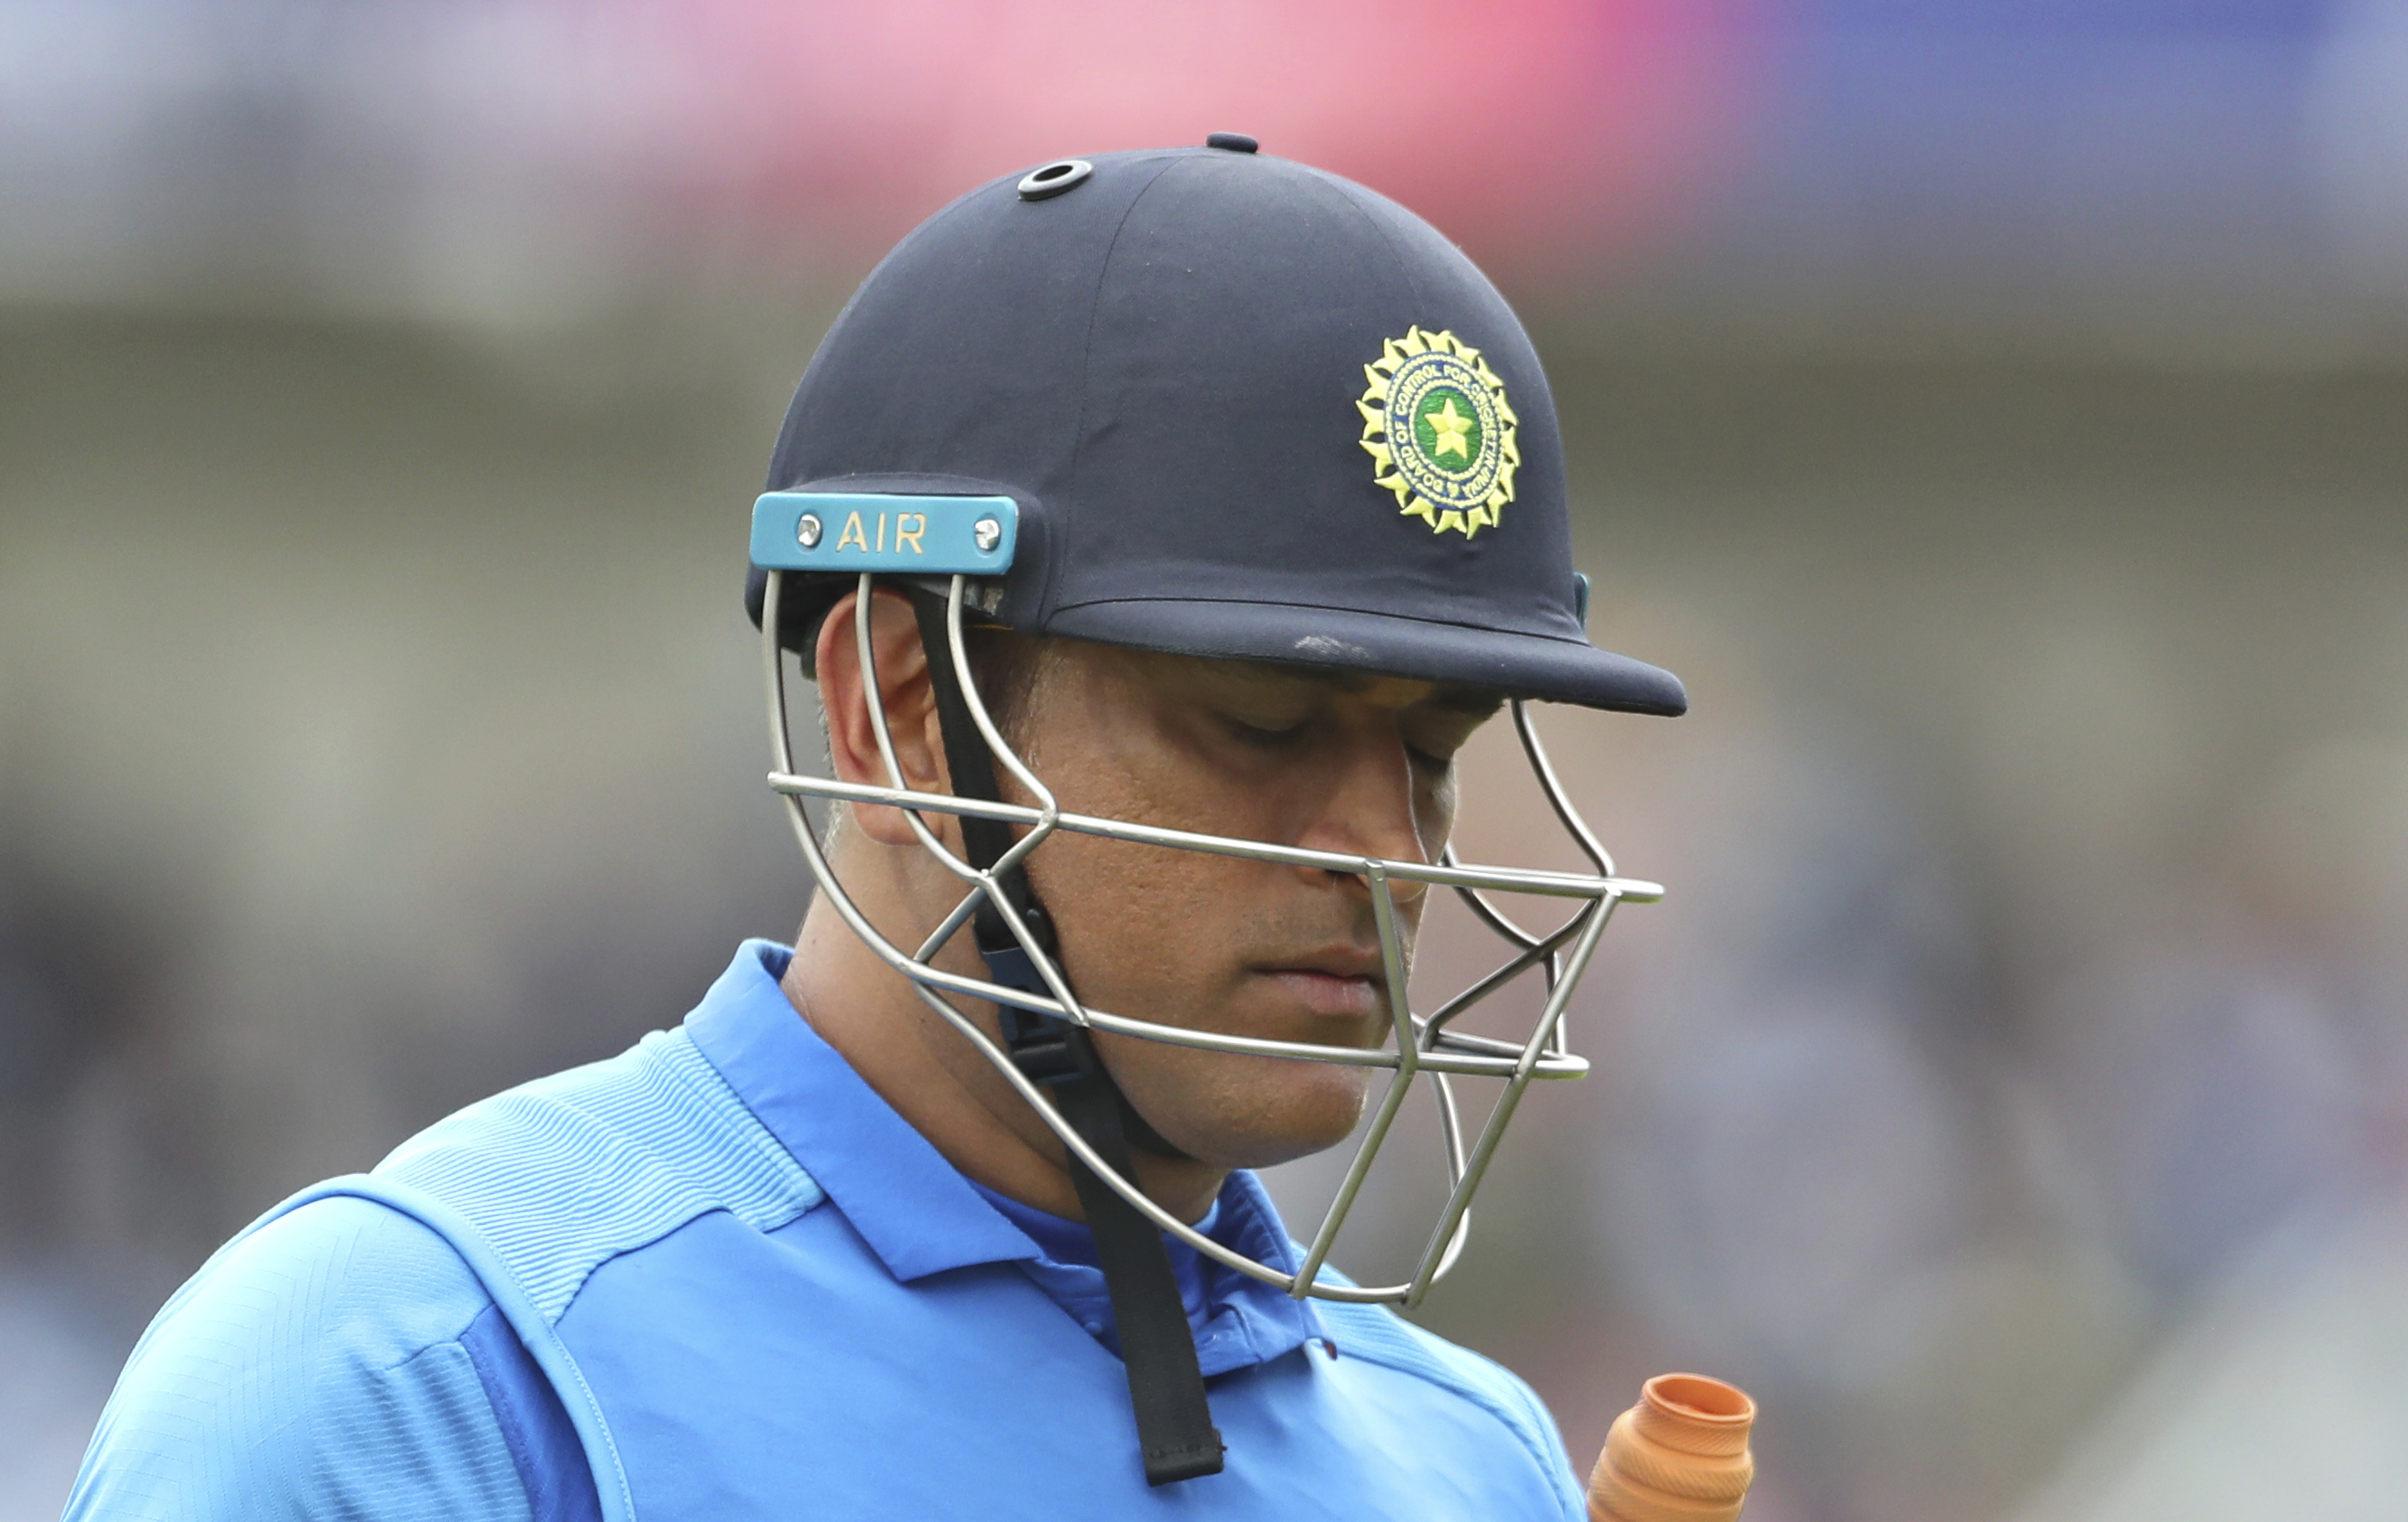 Dhoni leaves the field after being dismissed by Martin Guptill in the semi-final between India and New Zealand at Old Trafford on July 10.